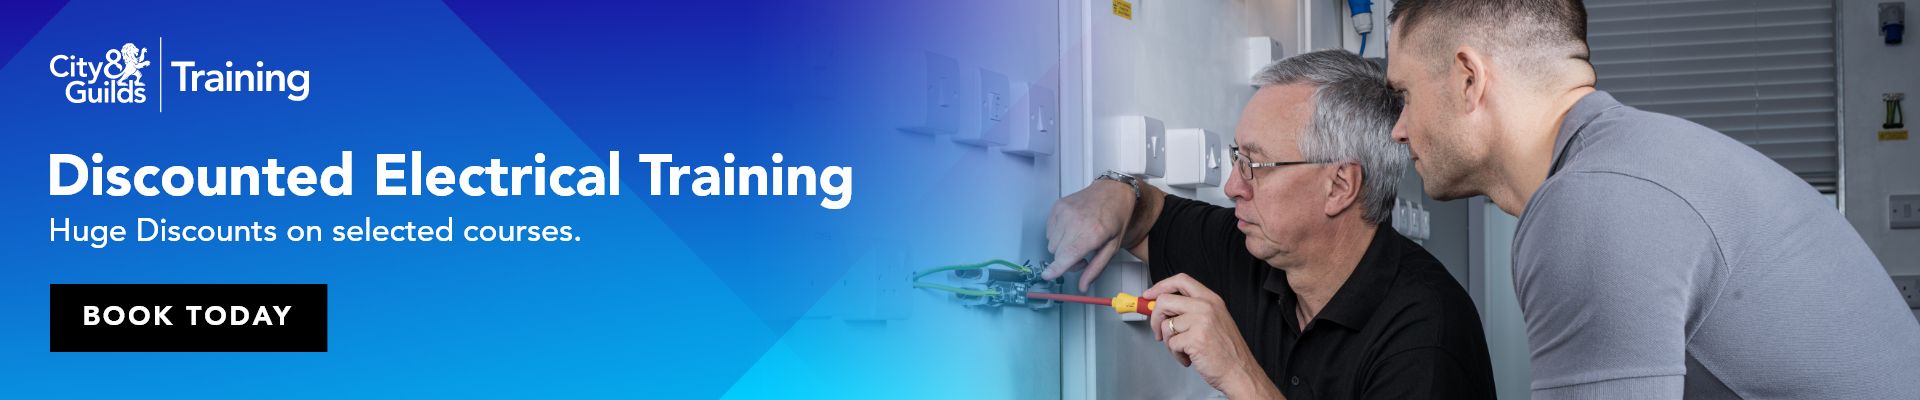 discounted electrical training